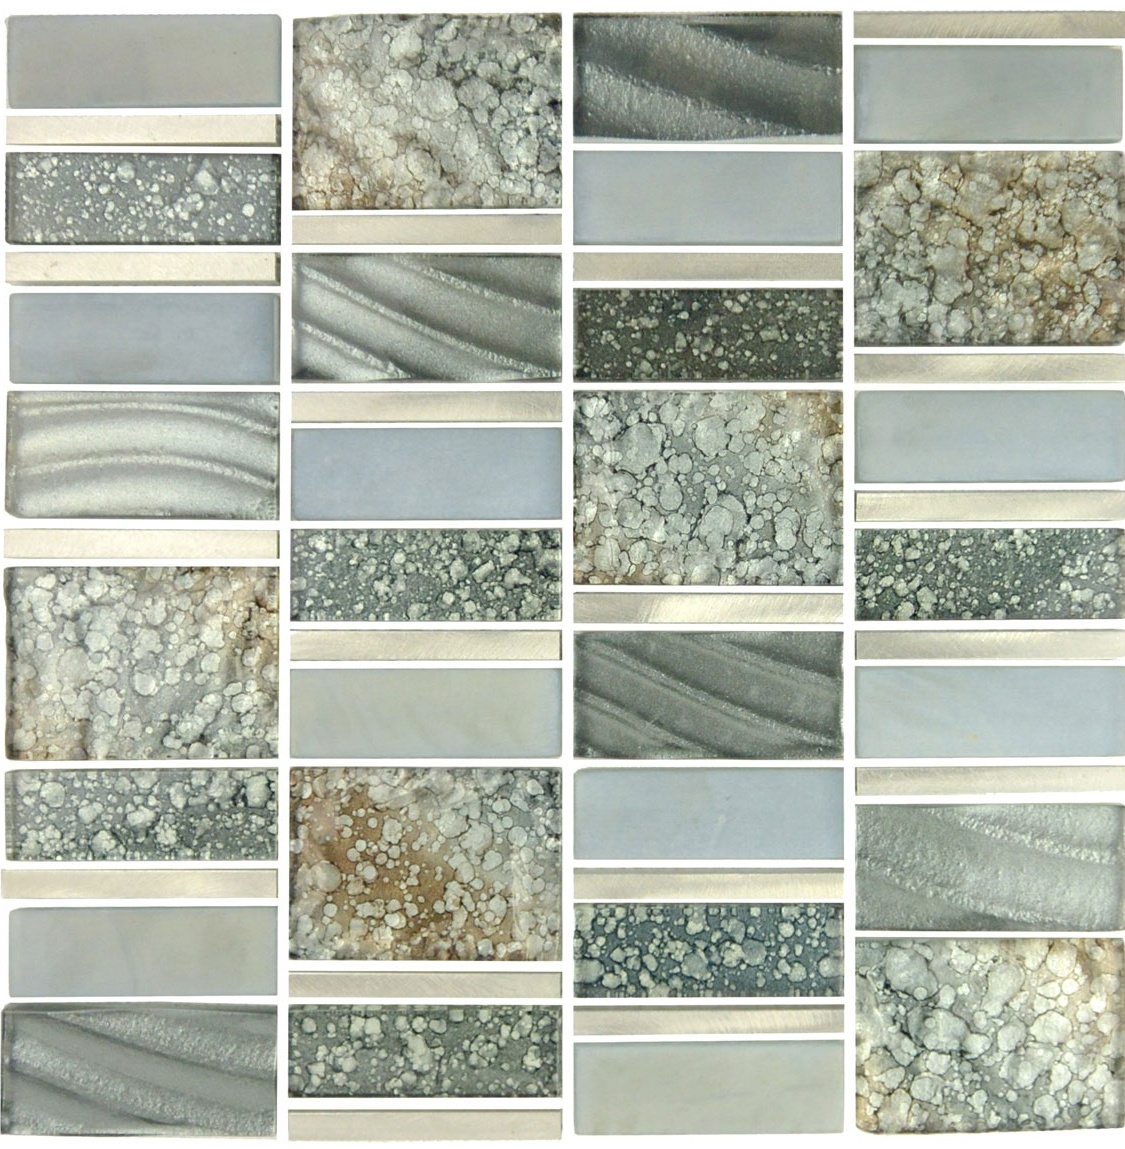 Silver Sea 12x12 Glossy Imperial Collection Mosaic